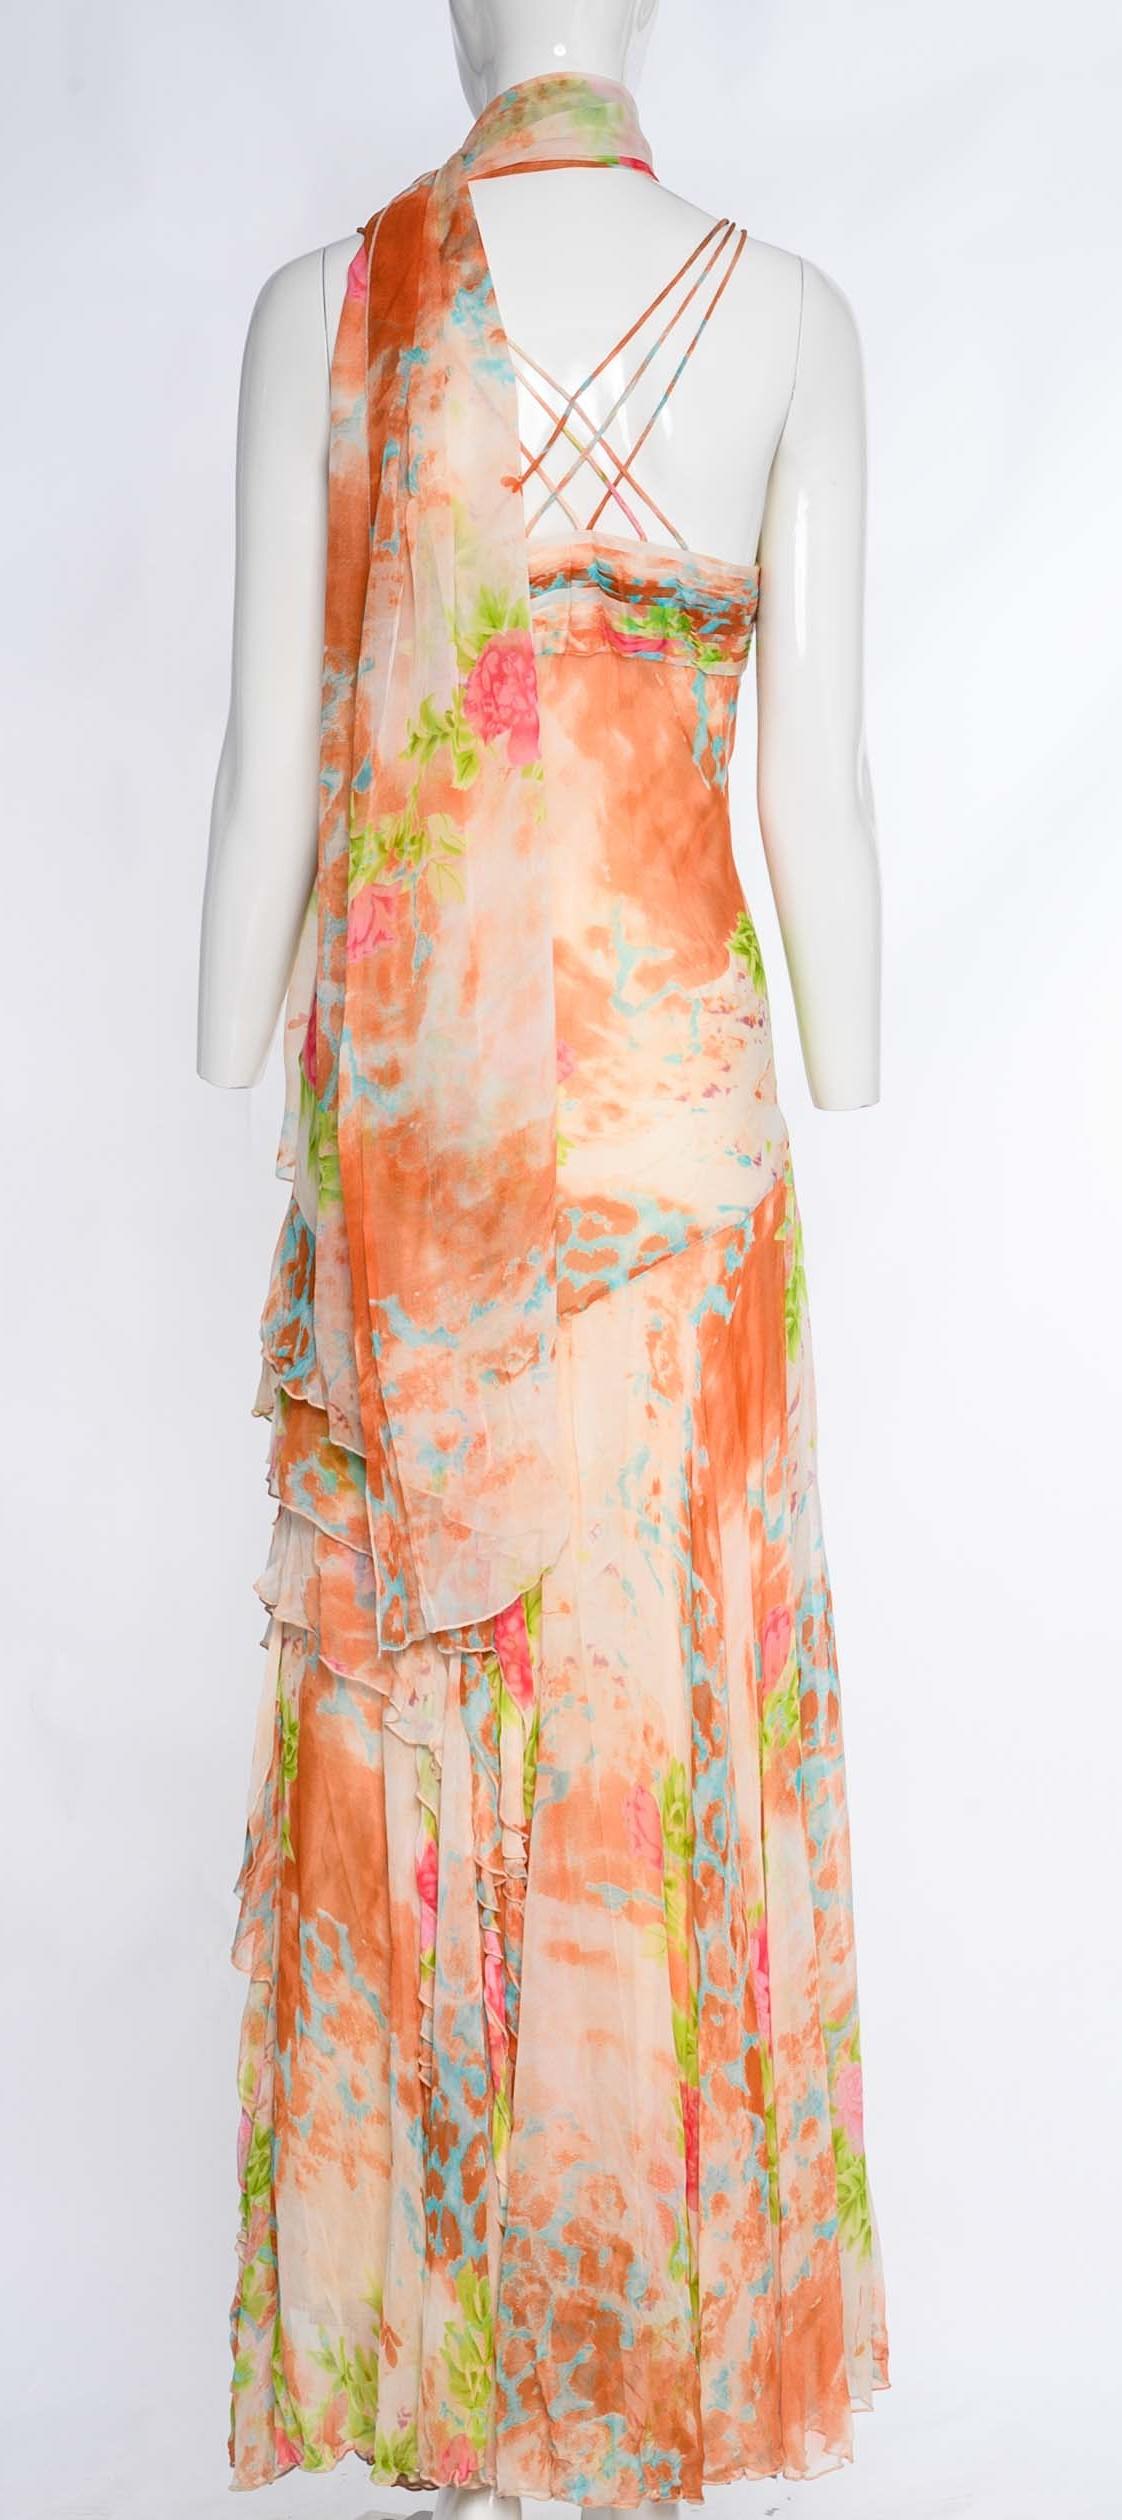 The vintage Diane Freis dress is a captivating piece crafted from silk, featuring a vibrant marmalade orange and blue leopard pattern complemented by delicate pink floral accents and exquisite hand-beaded embellishments.

The sweetheart neckline and